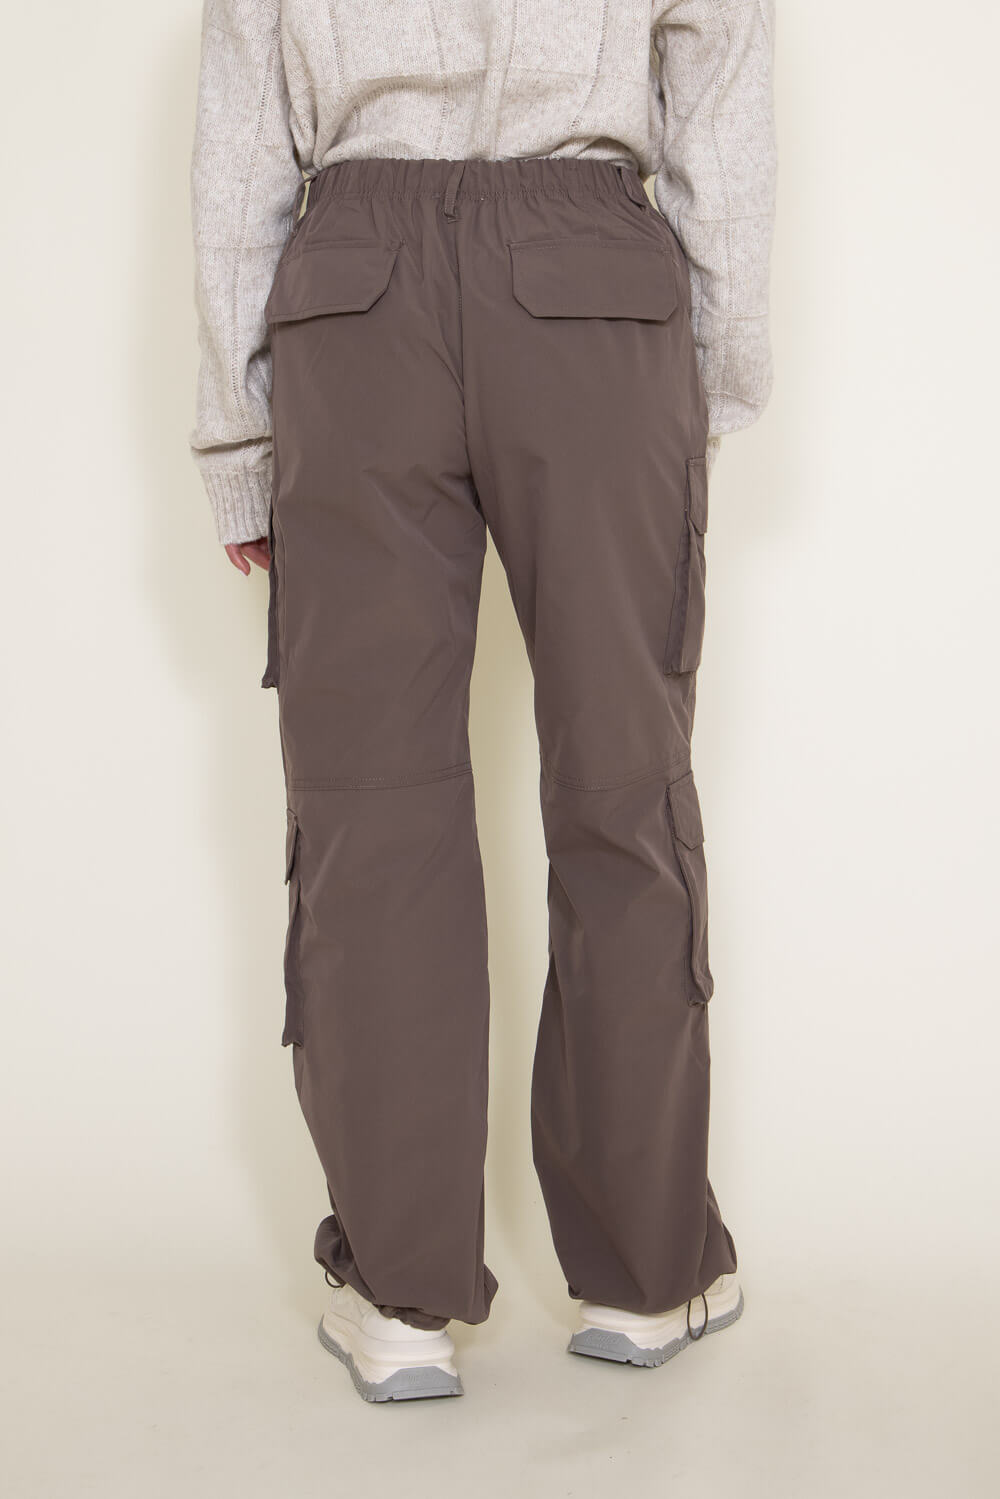 HOW TO STYLE: WHOISJACOV 6 Pocket Cargo Pants 